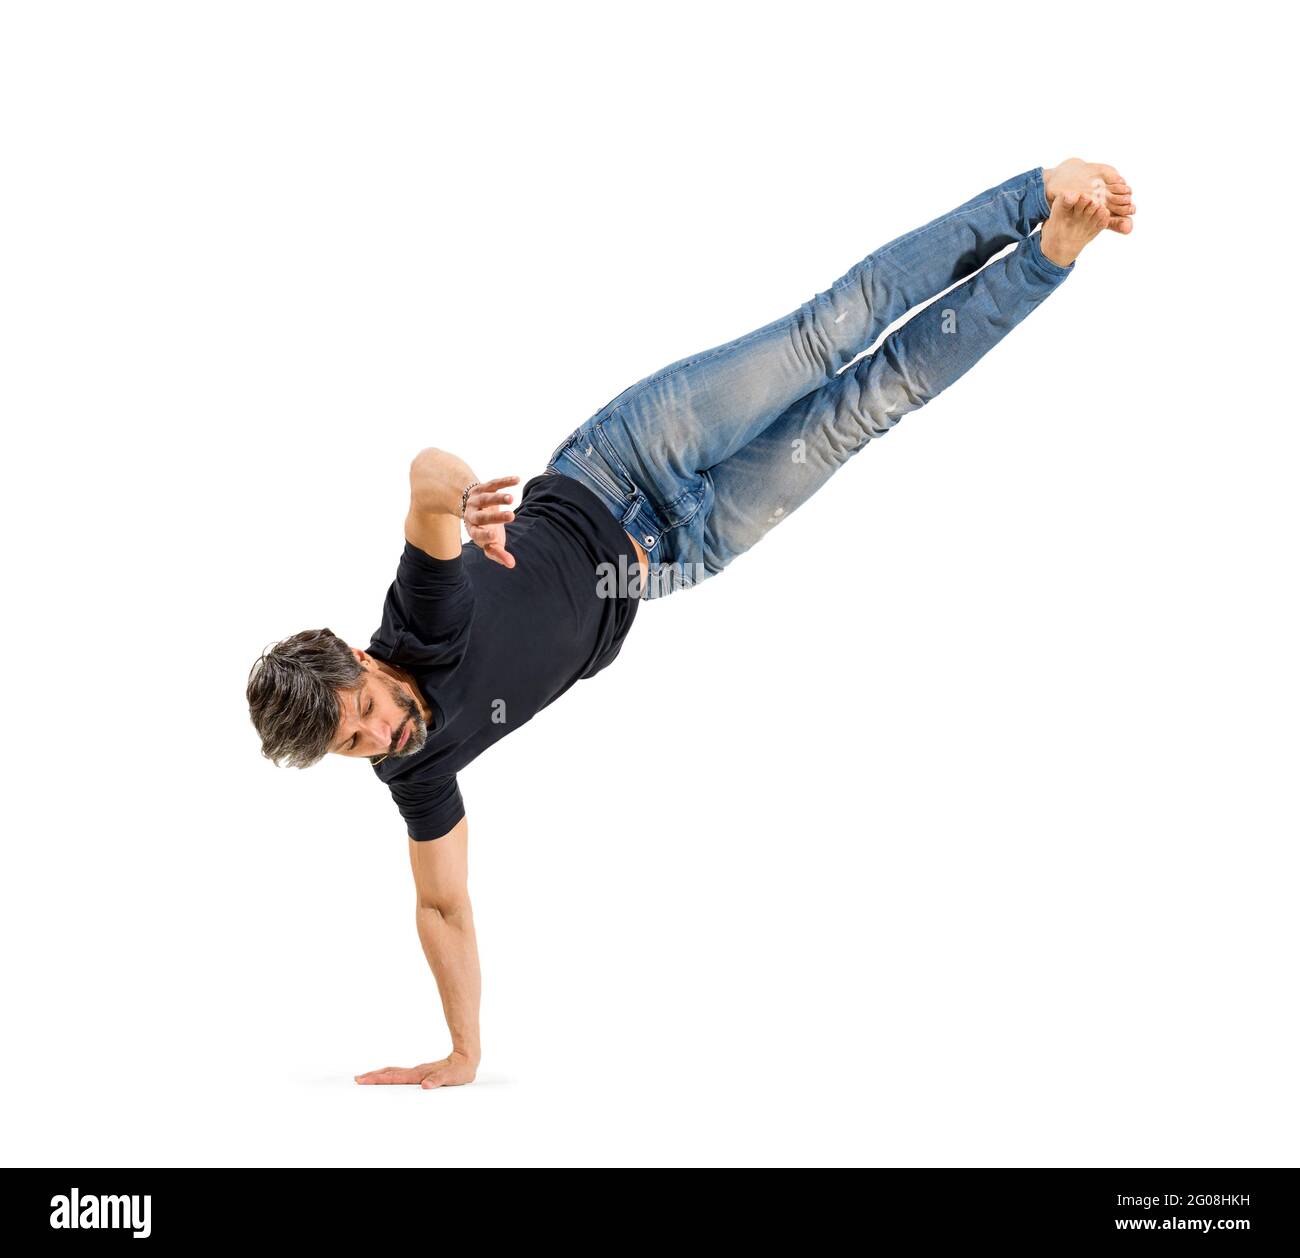 Fit athletic casual barefoot man doing a hip hop balancing pose on one hand isolated on a white background with copyspace Stock Photo